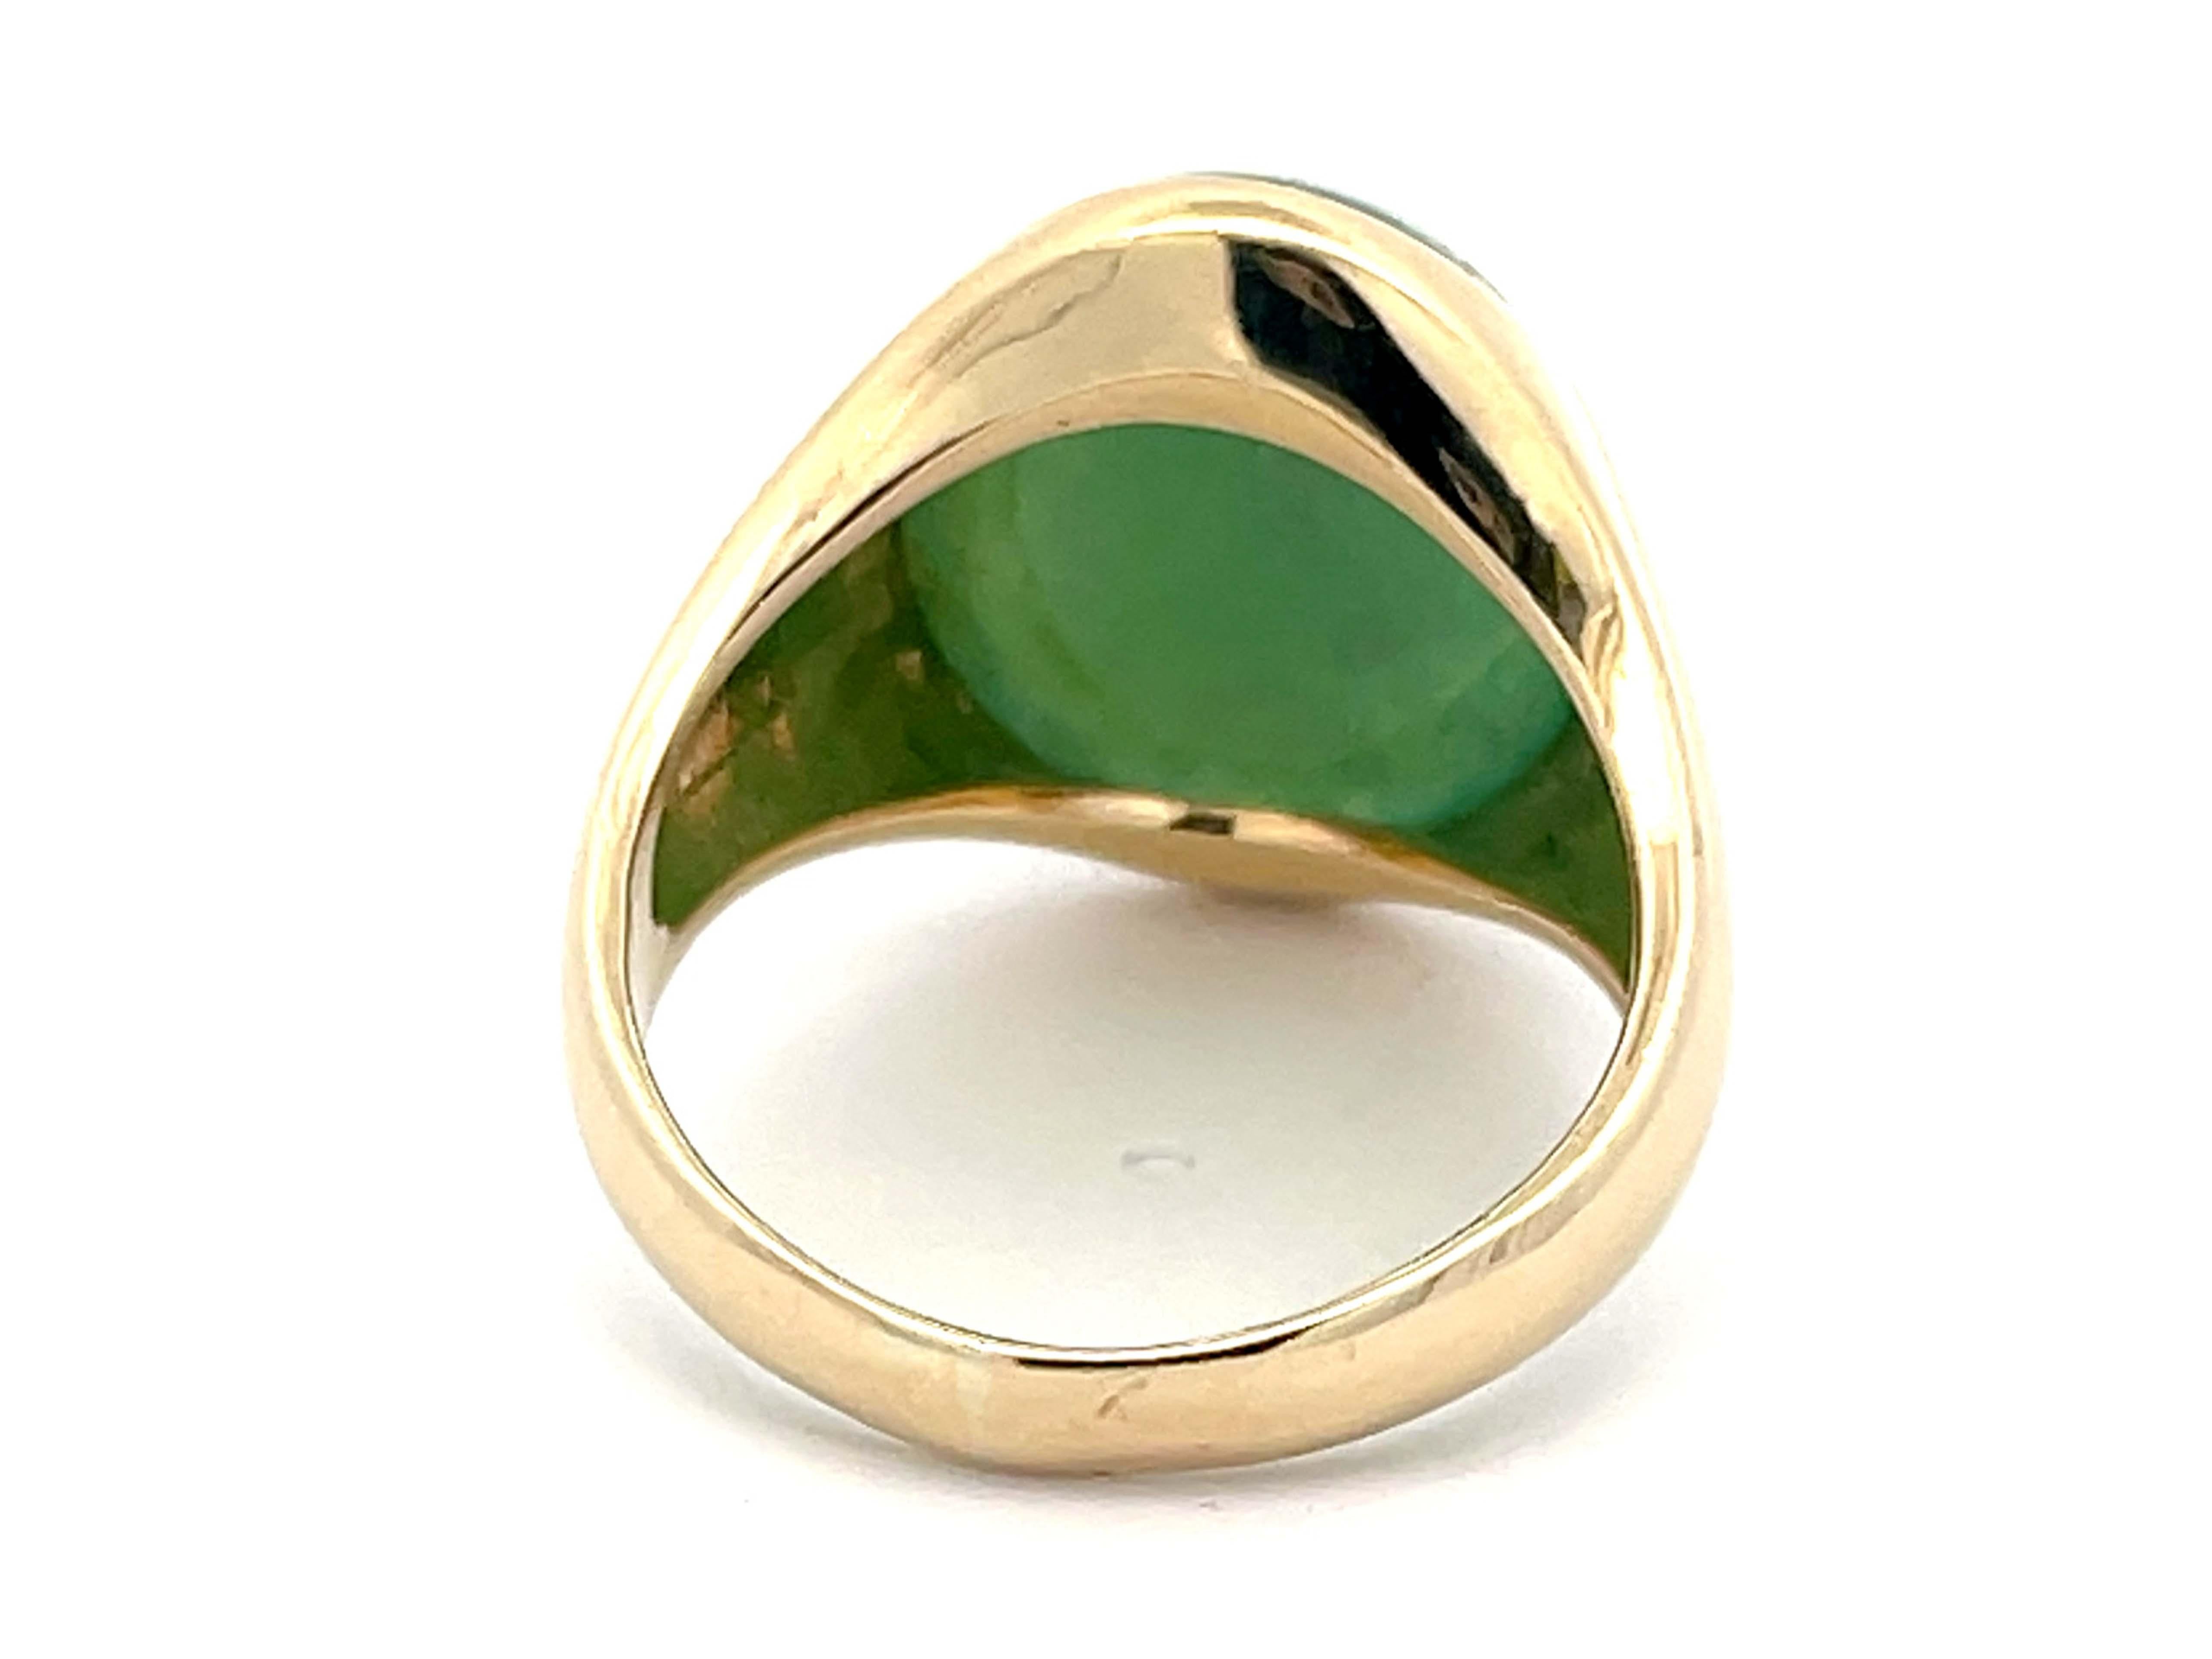 21 Carat Oval Cabochon Green Jade Ring in 14k Yellow Gold For Sale 2